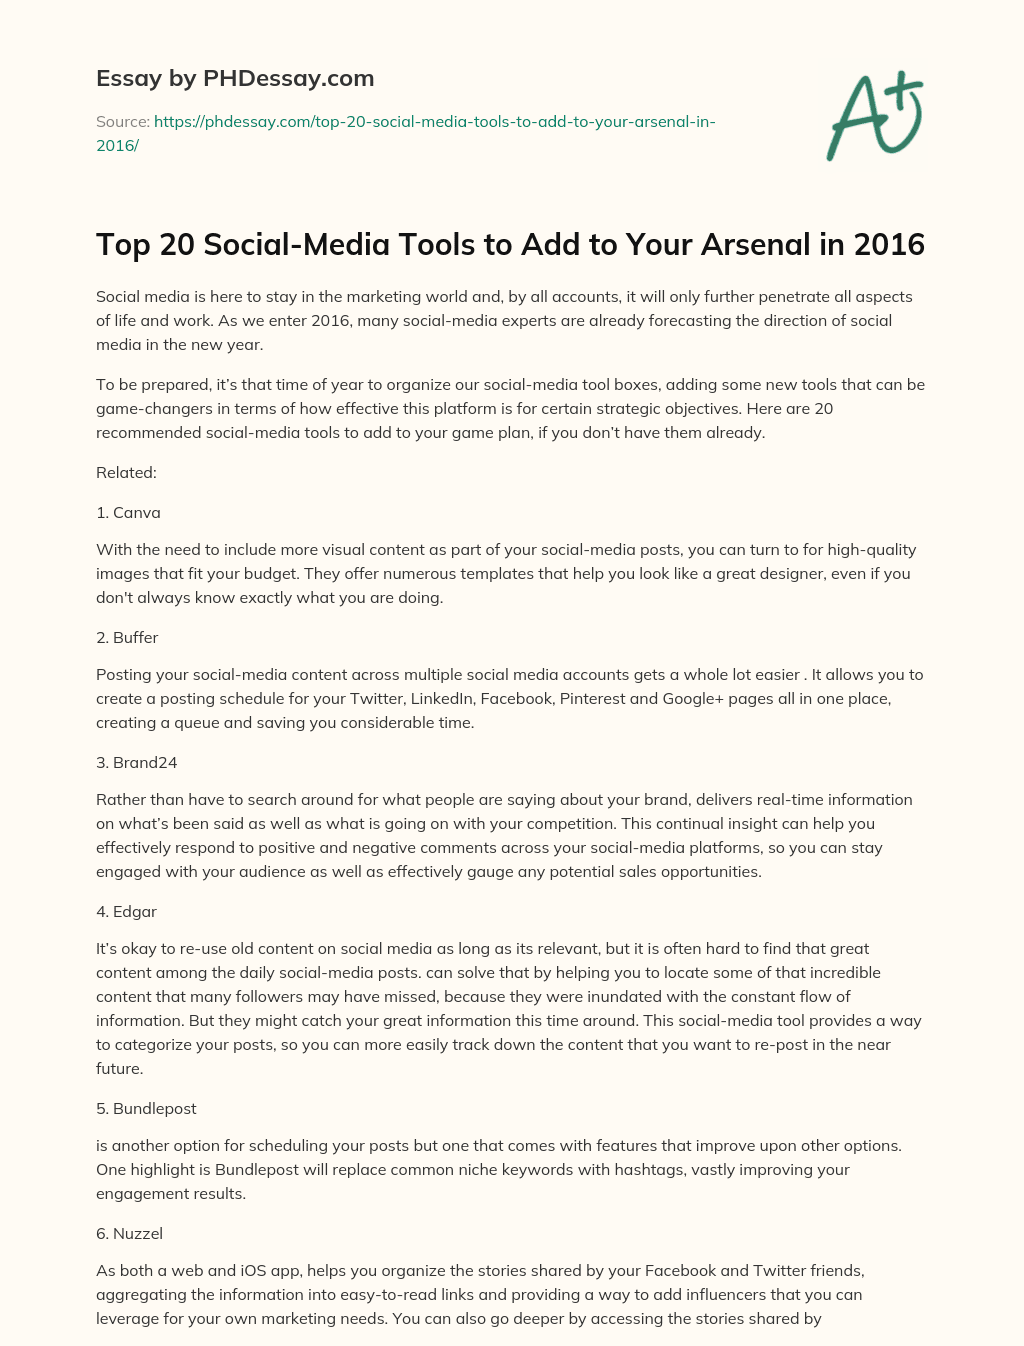 Top 20 Social-Media Tools to Add to Your Arsenal in 2016 essay